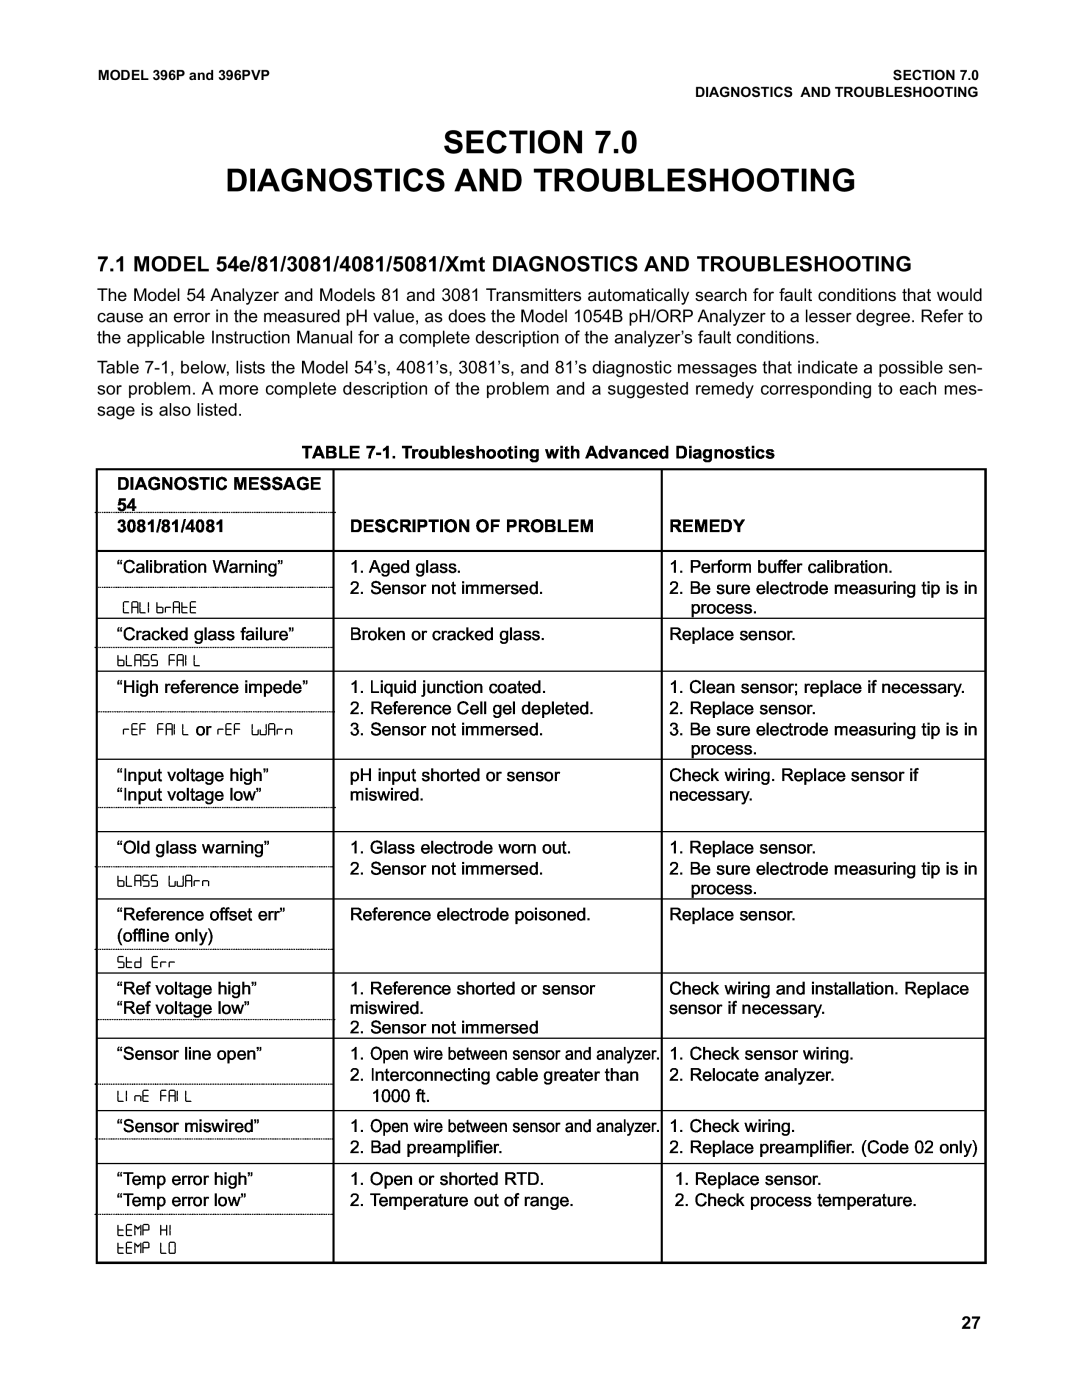 Emerson Process Management 396PVP instruction manual Section Diagnostics And Troubleshooting 